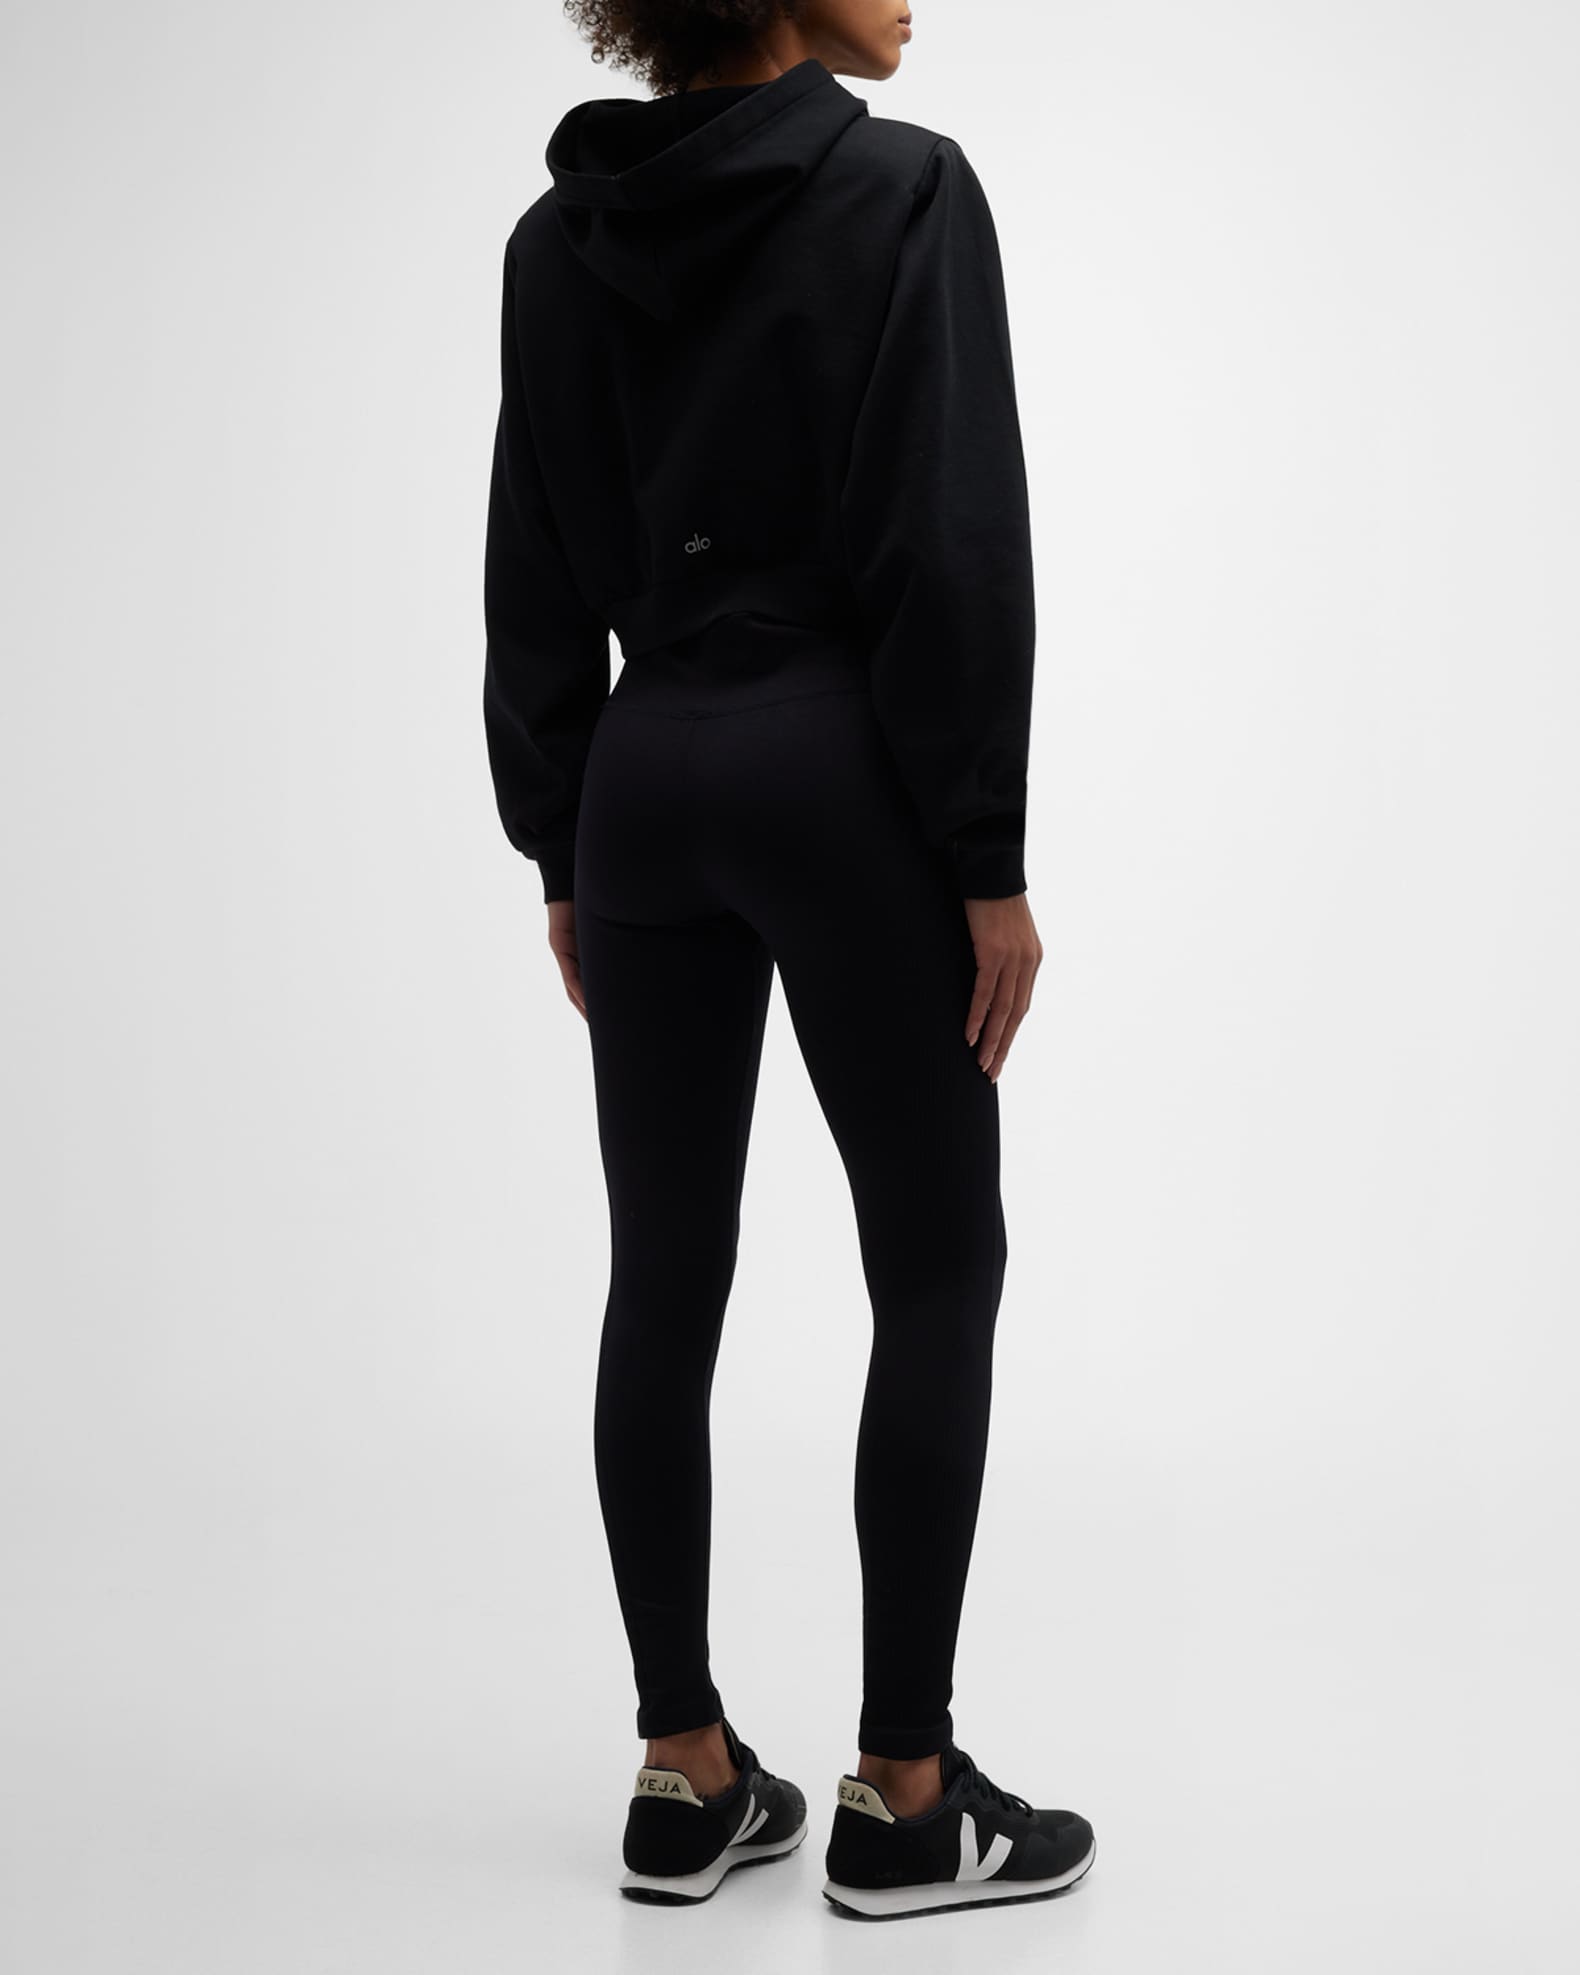 Alo Yoga Cropped Go Time Padded Hoodie | Neiman Marcus